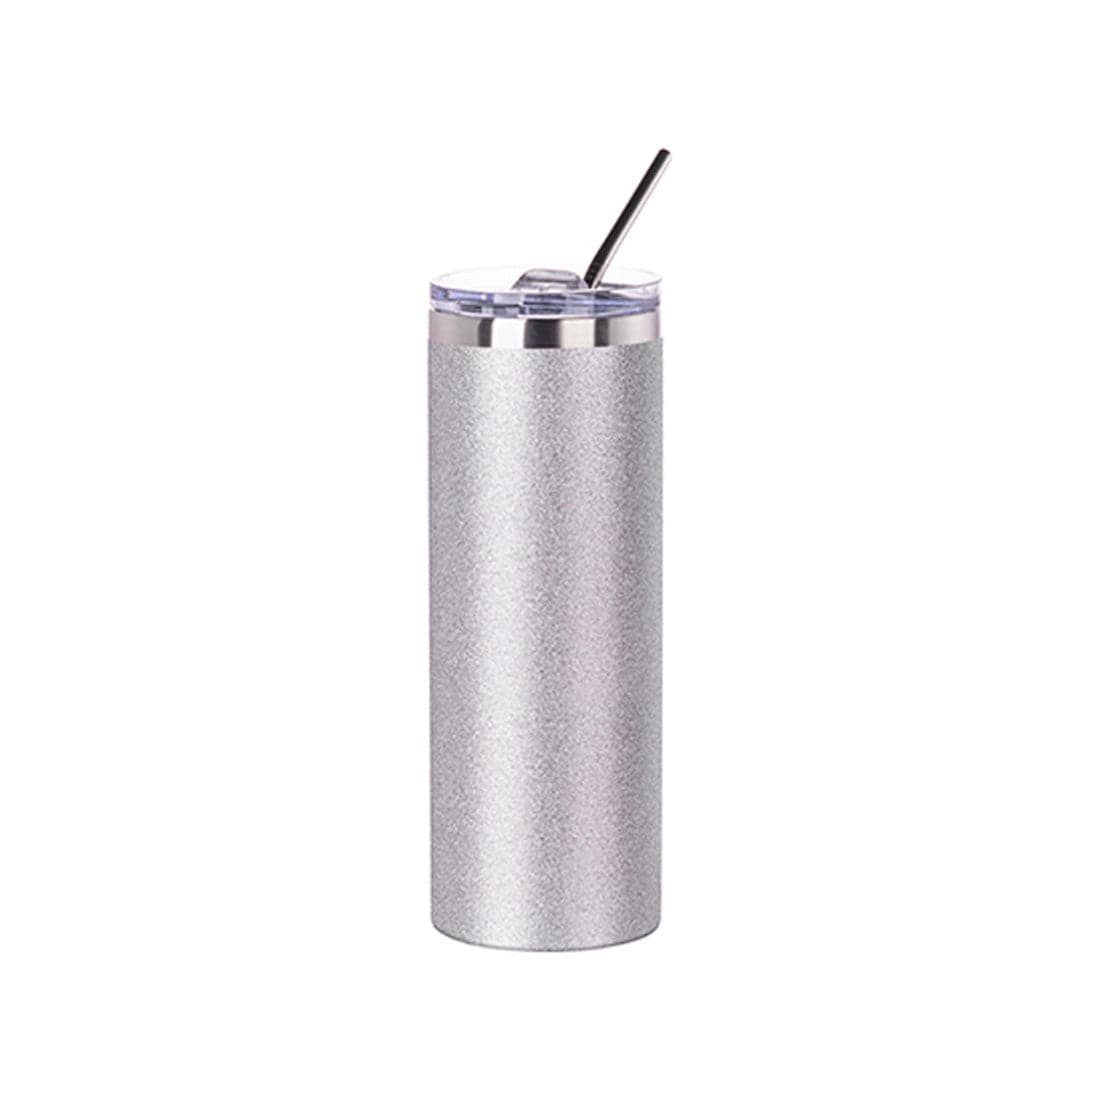 Pearl Coating™ 20oz/600ml Sublimation Glitter Stainless Steel Silver Skinny Tumbler with Straw & Lid - Pack of 5 - Joto Imaging Supplies US